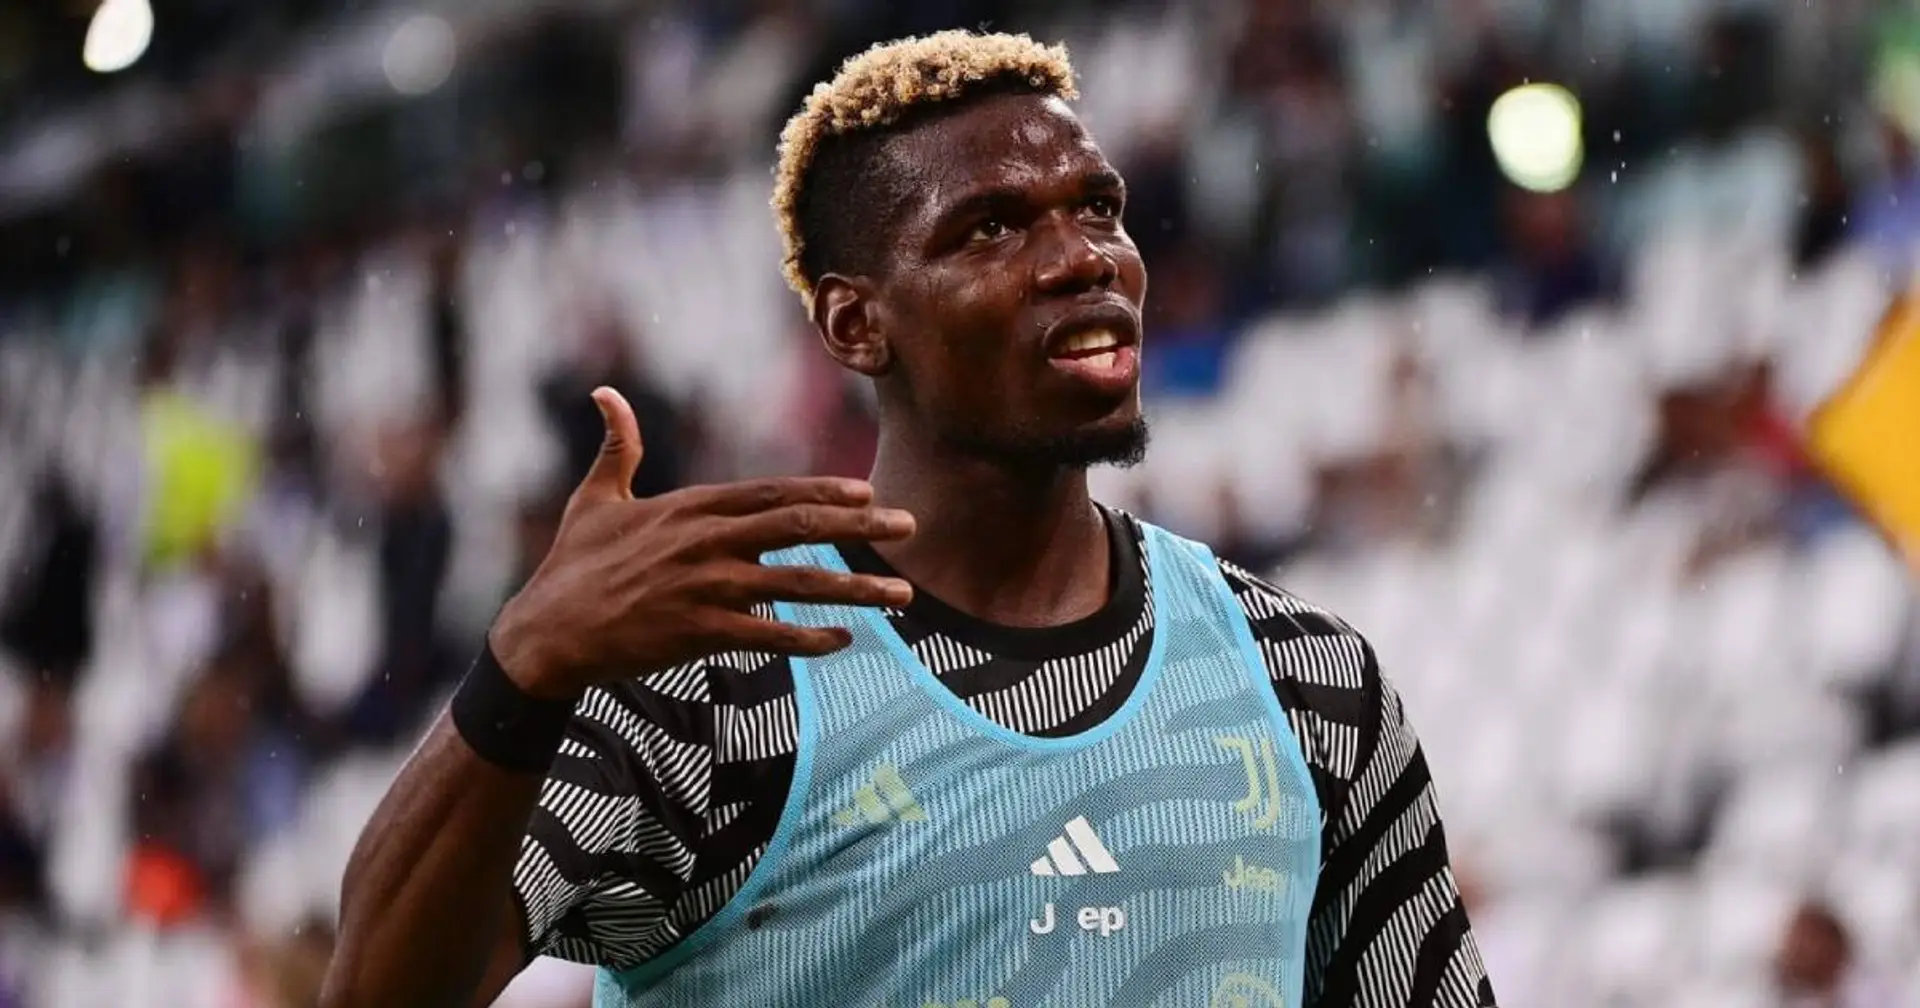 'Full story will become clear': Pogba vows to appeal doping ban